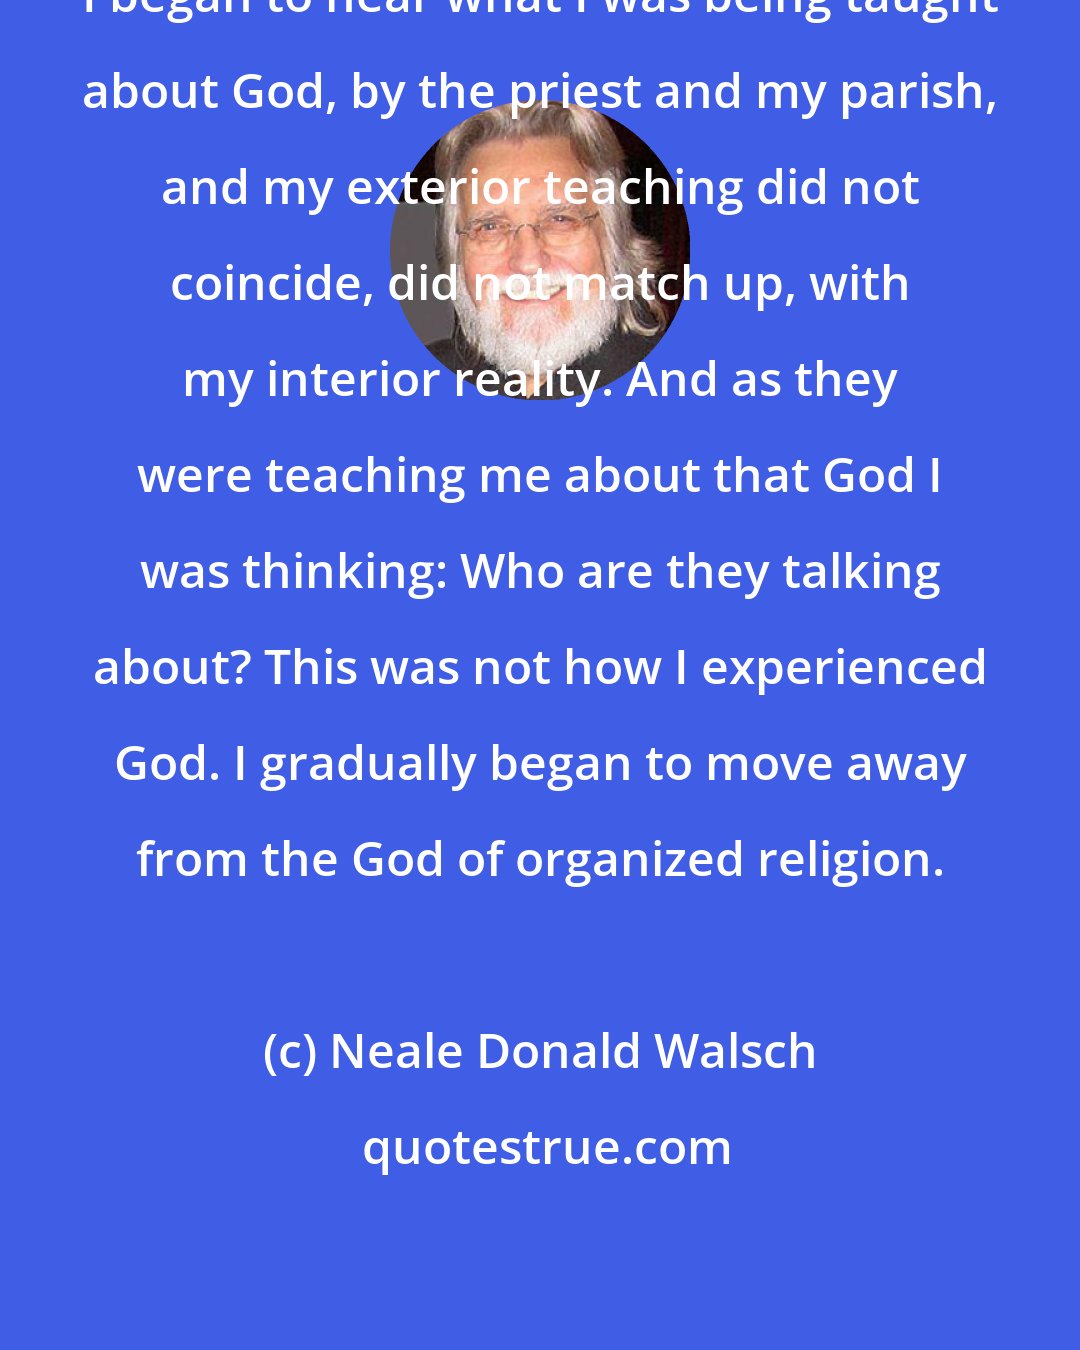 Neale Donald Walsch: I began to hear what I was being taught about God, by the priest and my parish, and my exterior teaching did not coincide, did not match up, with my interior reality. And as they were teaching me about that God I was thinking: Who are they talking about? This was not how I experienced God. I gradually began to move away from the God of organized religion.